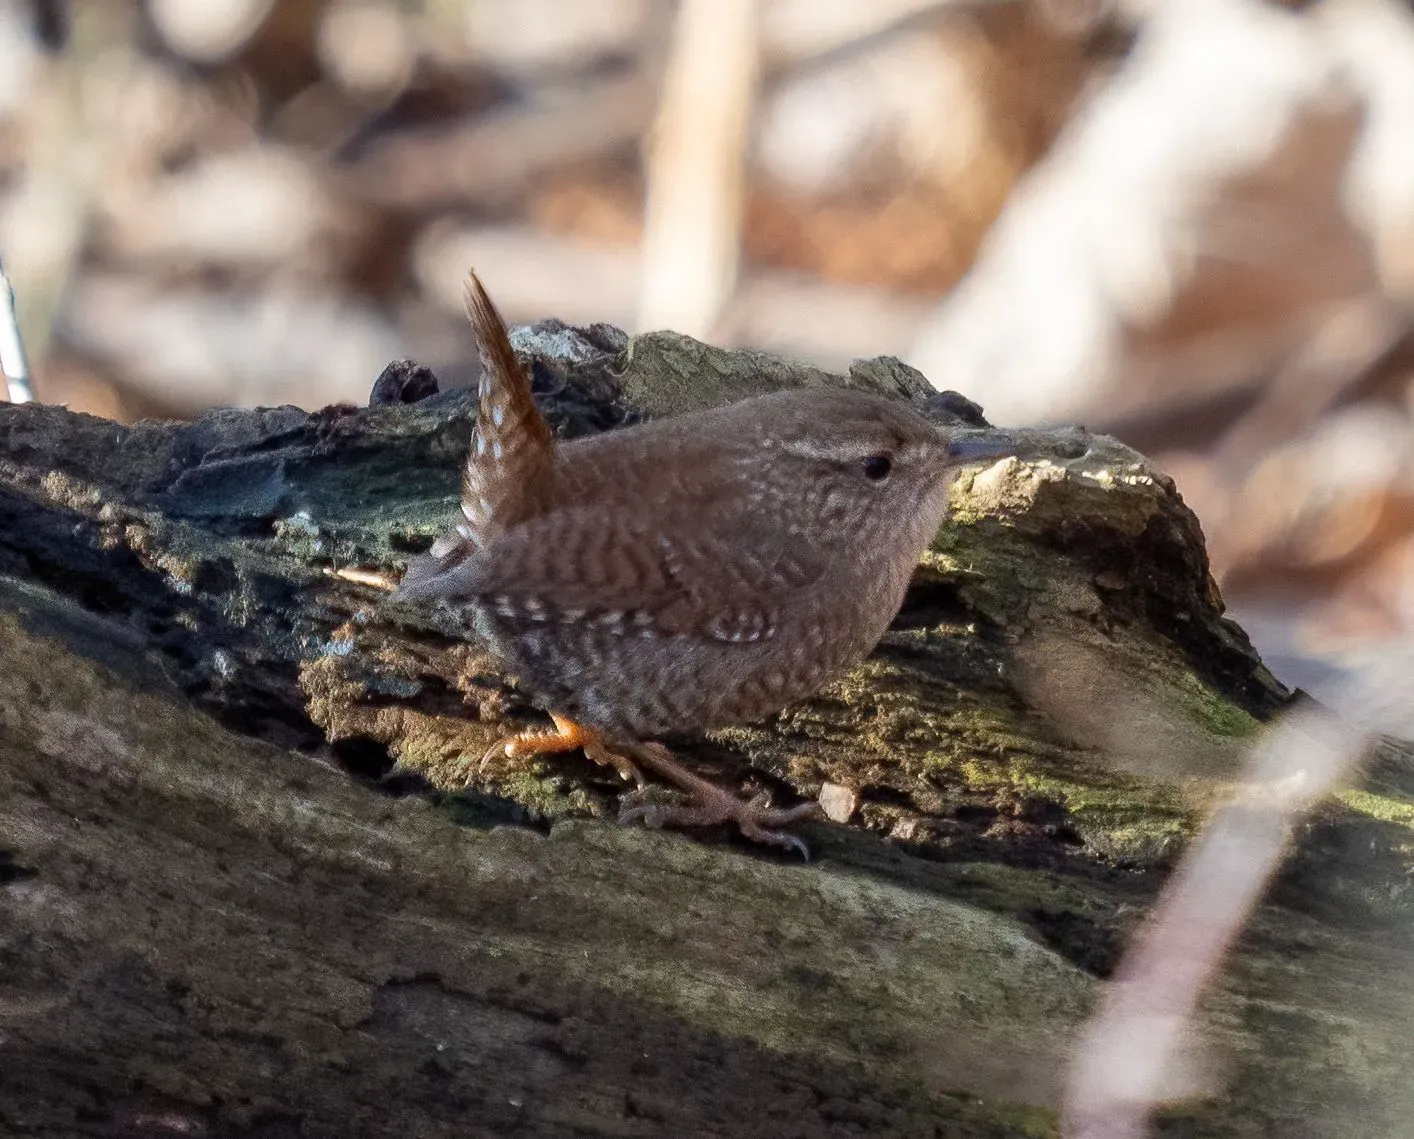 Winter wren can be seen investigating upturned roots and decaying logs for their diet.